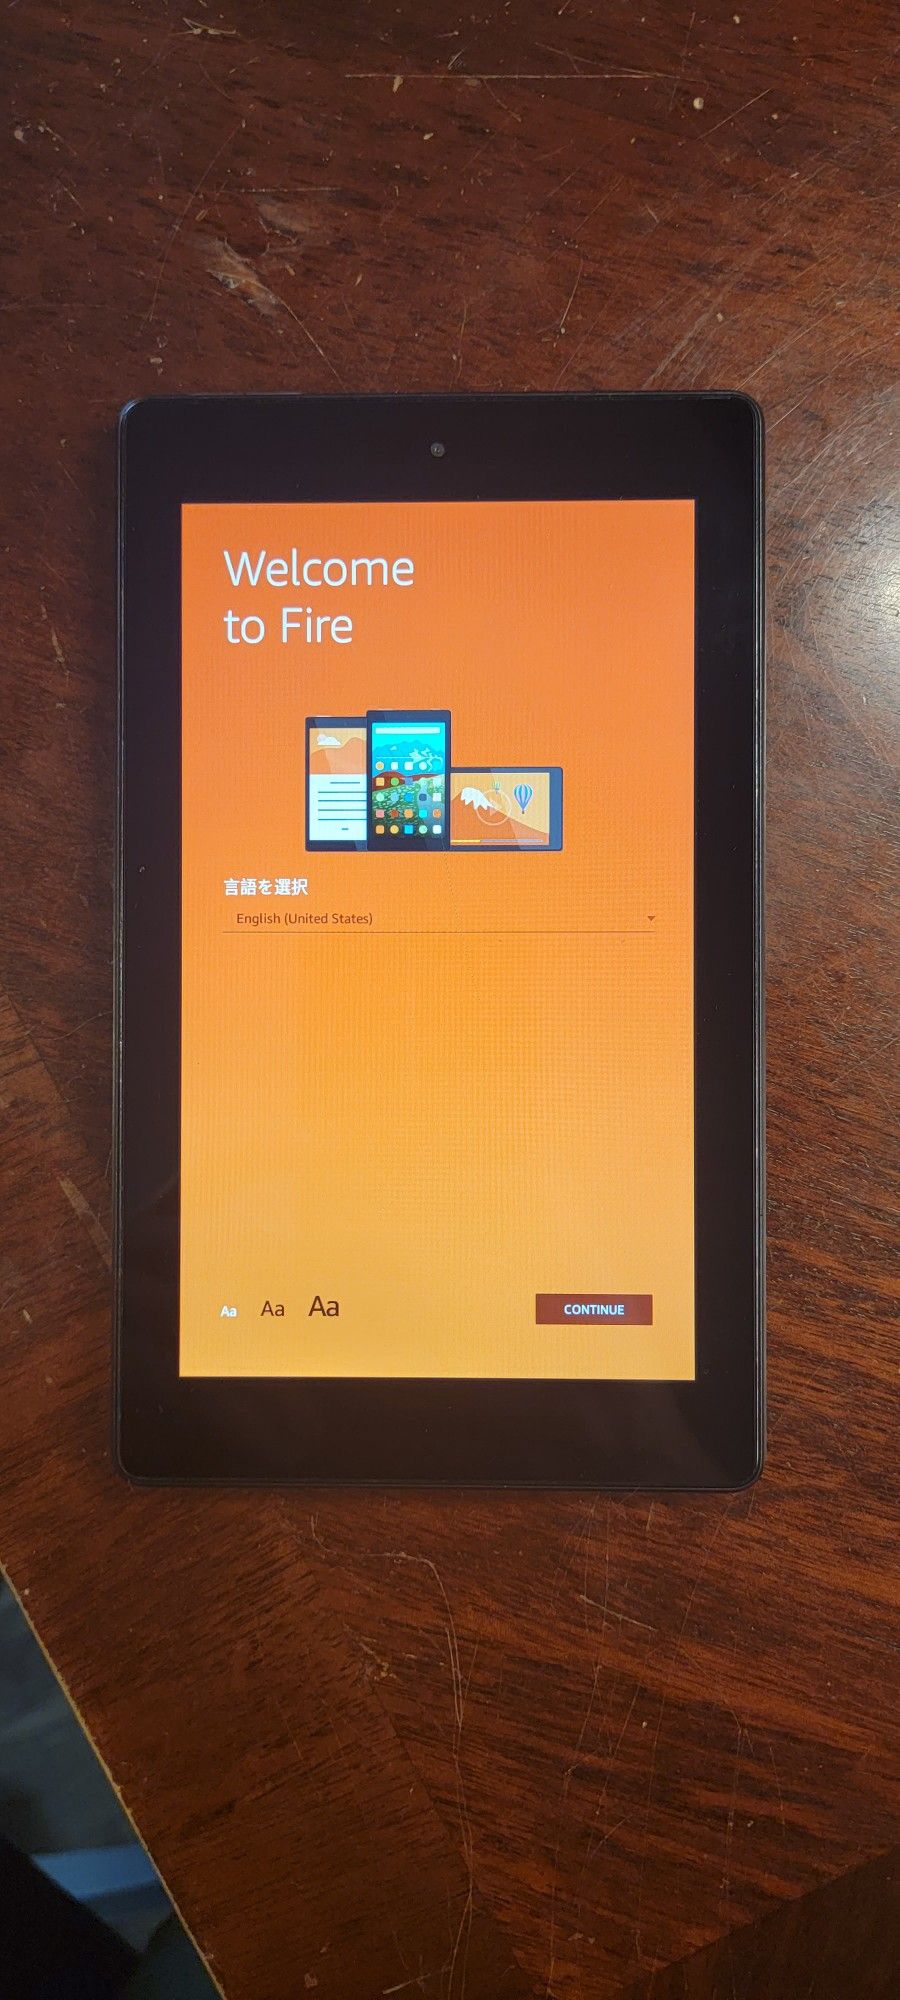 Amazon Fire Tablet 7" Display